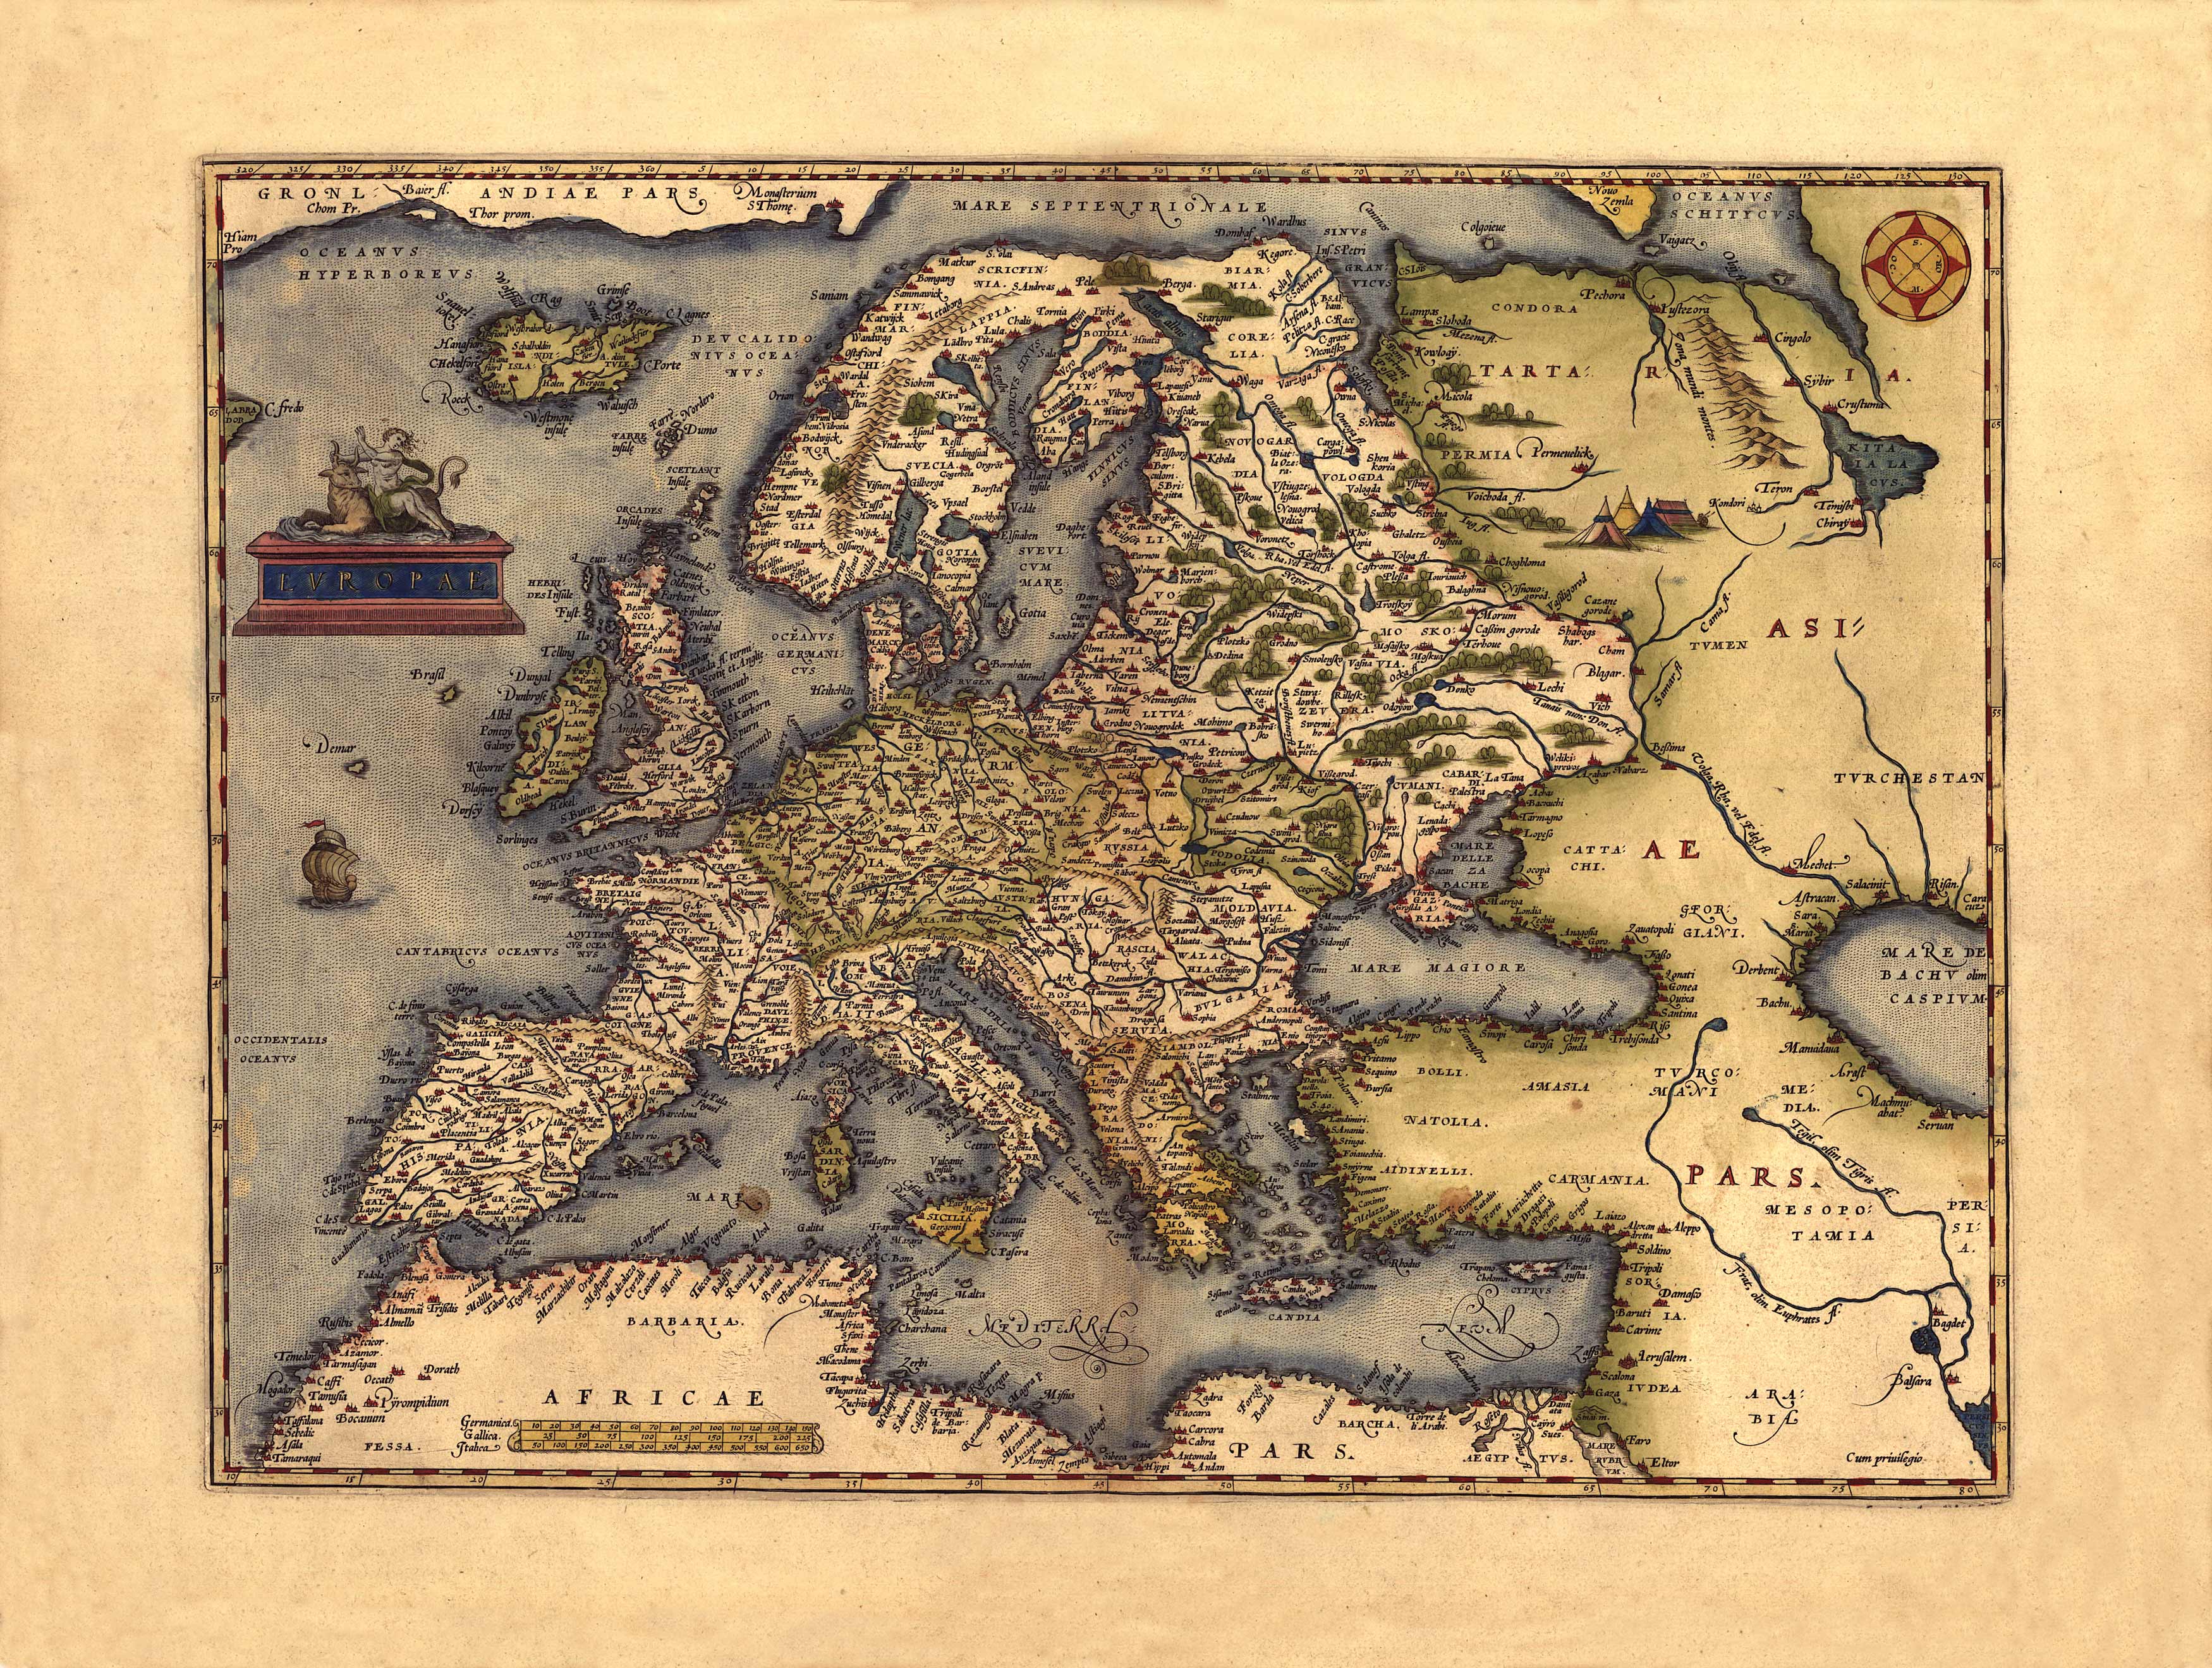 old europe map